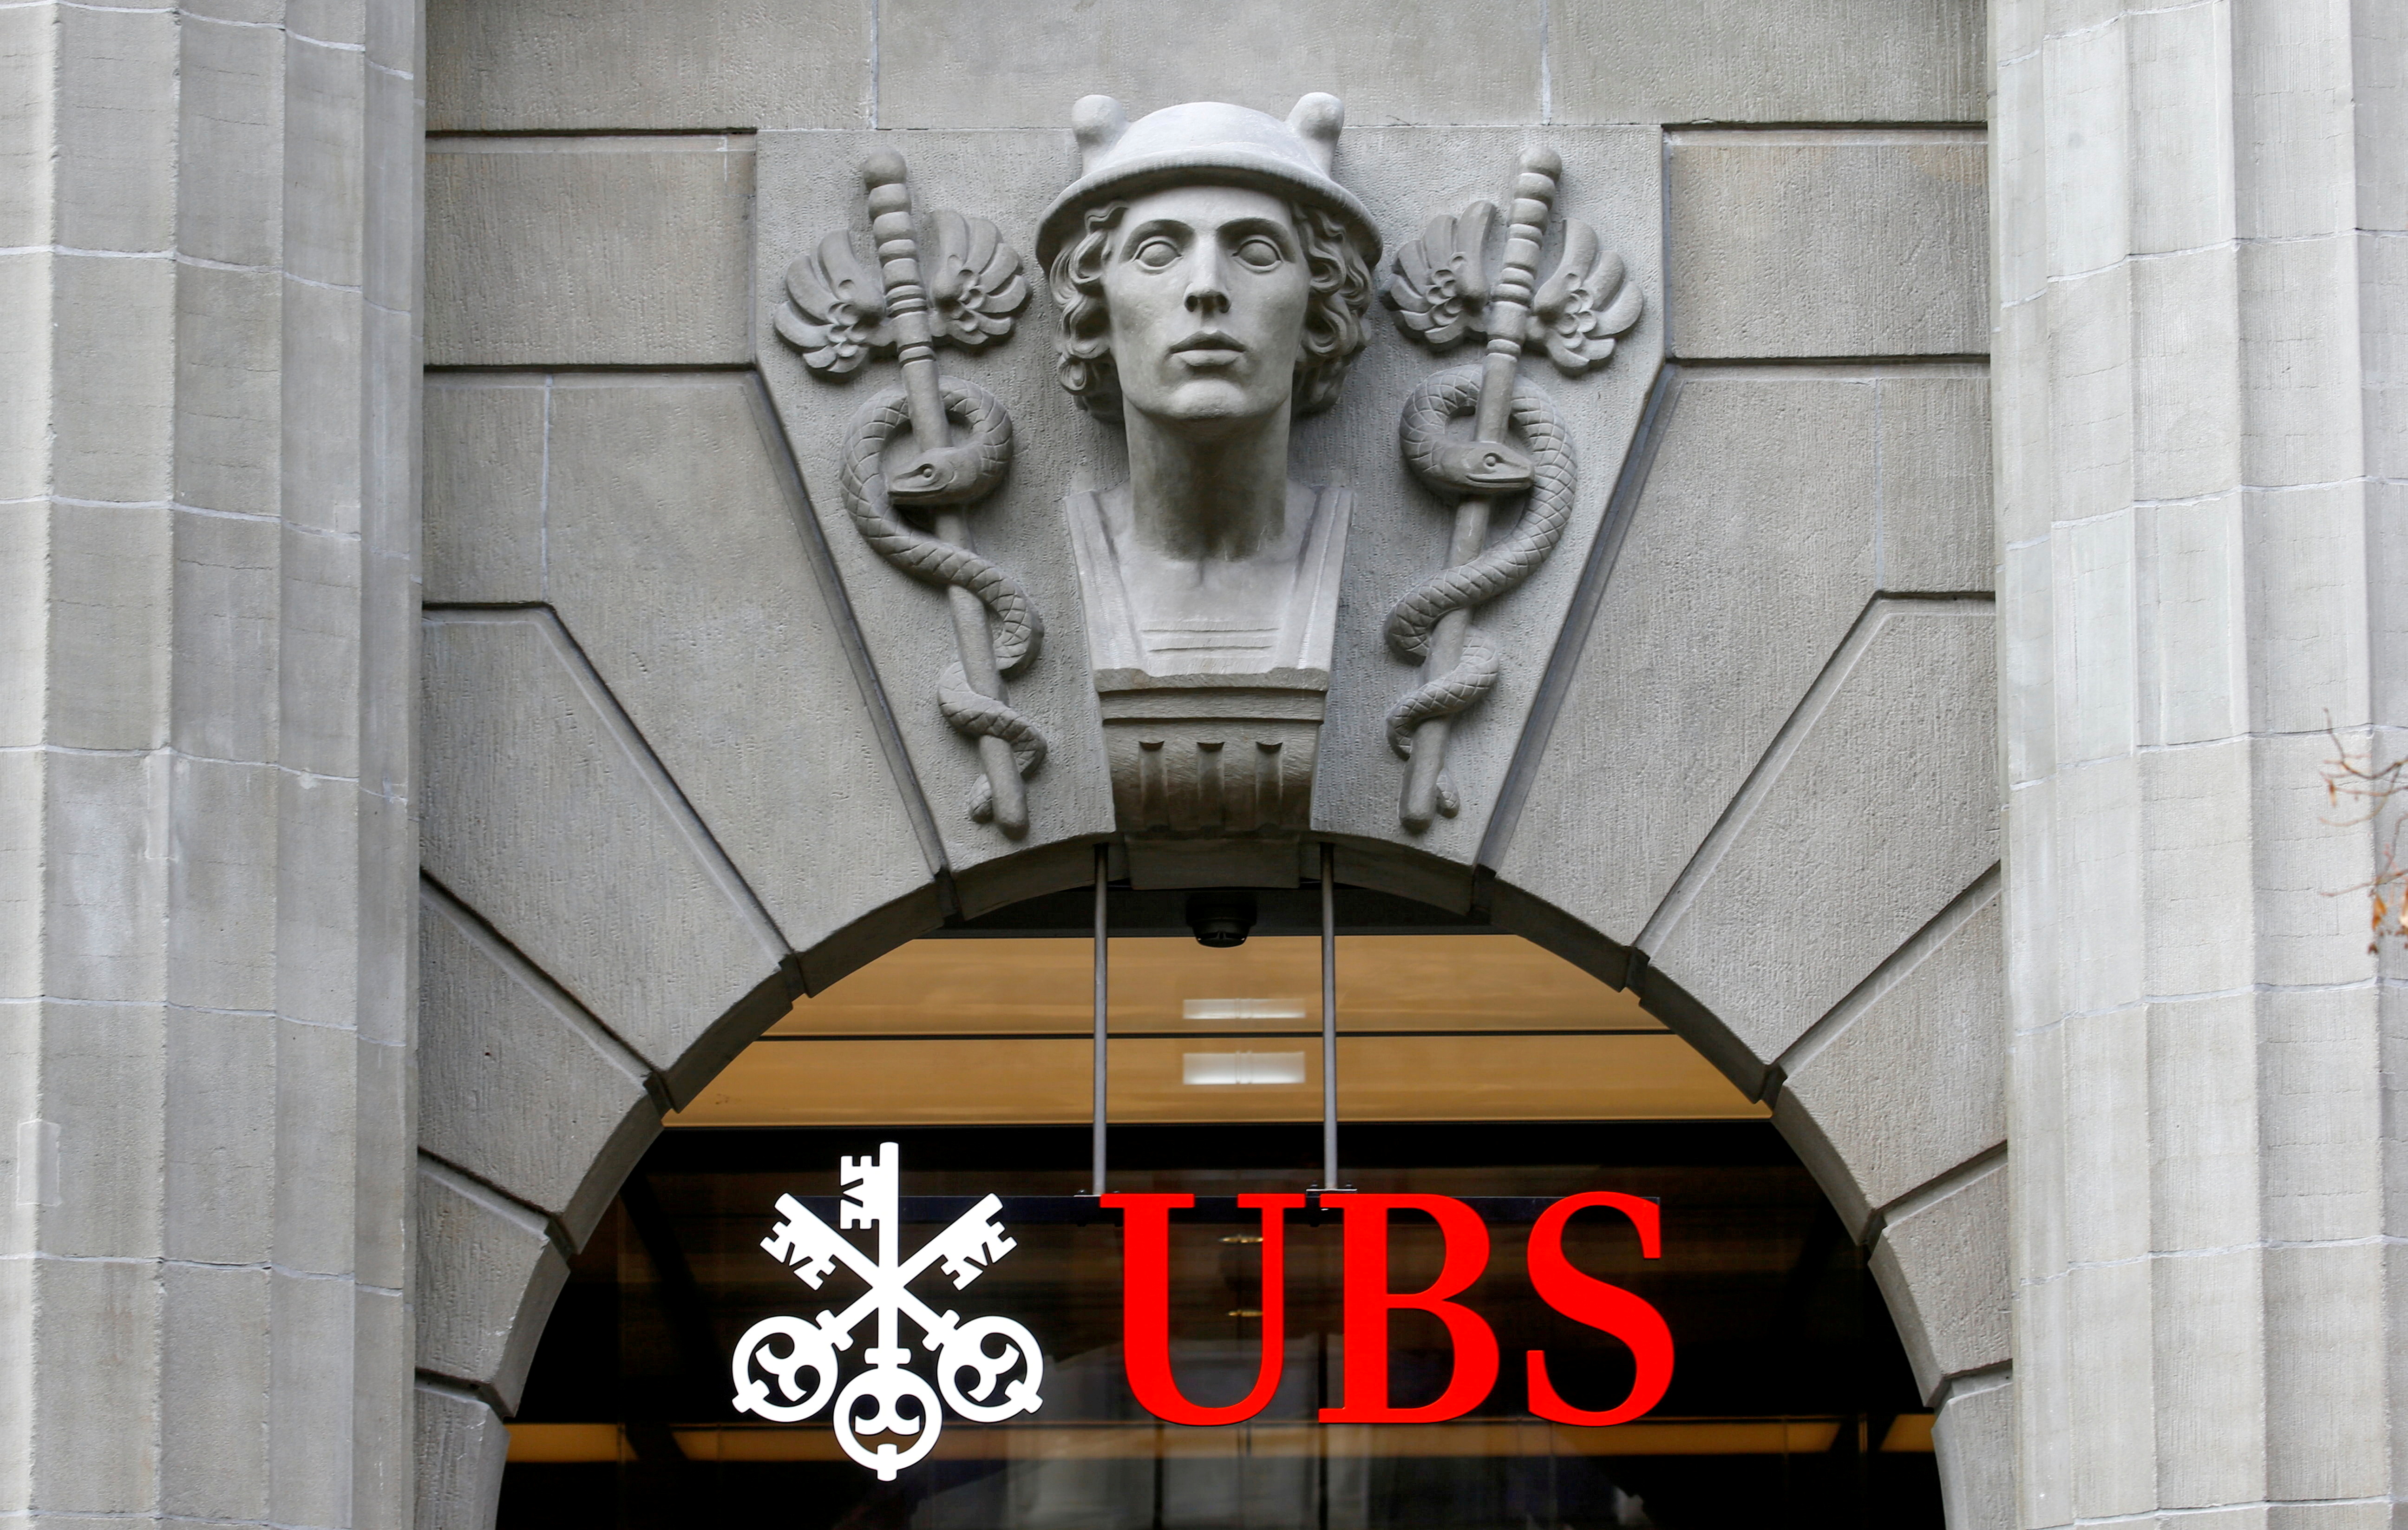 FILE PHOTO: The logo of Swiss bank UBS is seen at its headquarters in Zurich, Switzerland February 17, 2021. REUTERS/Arnd Wiegmann/File Photo